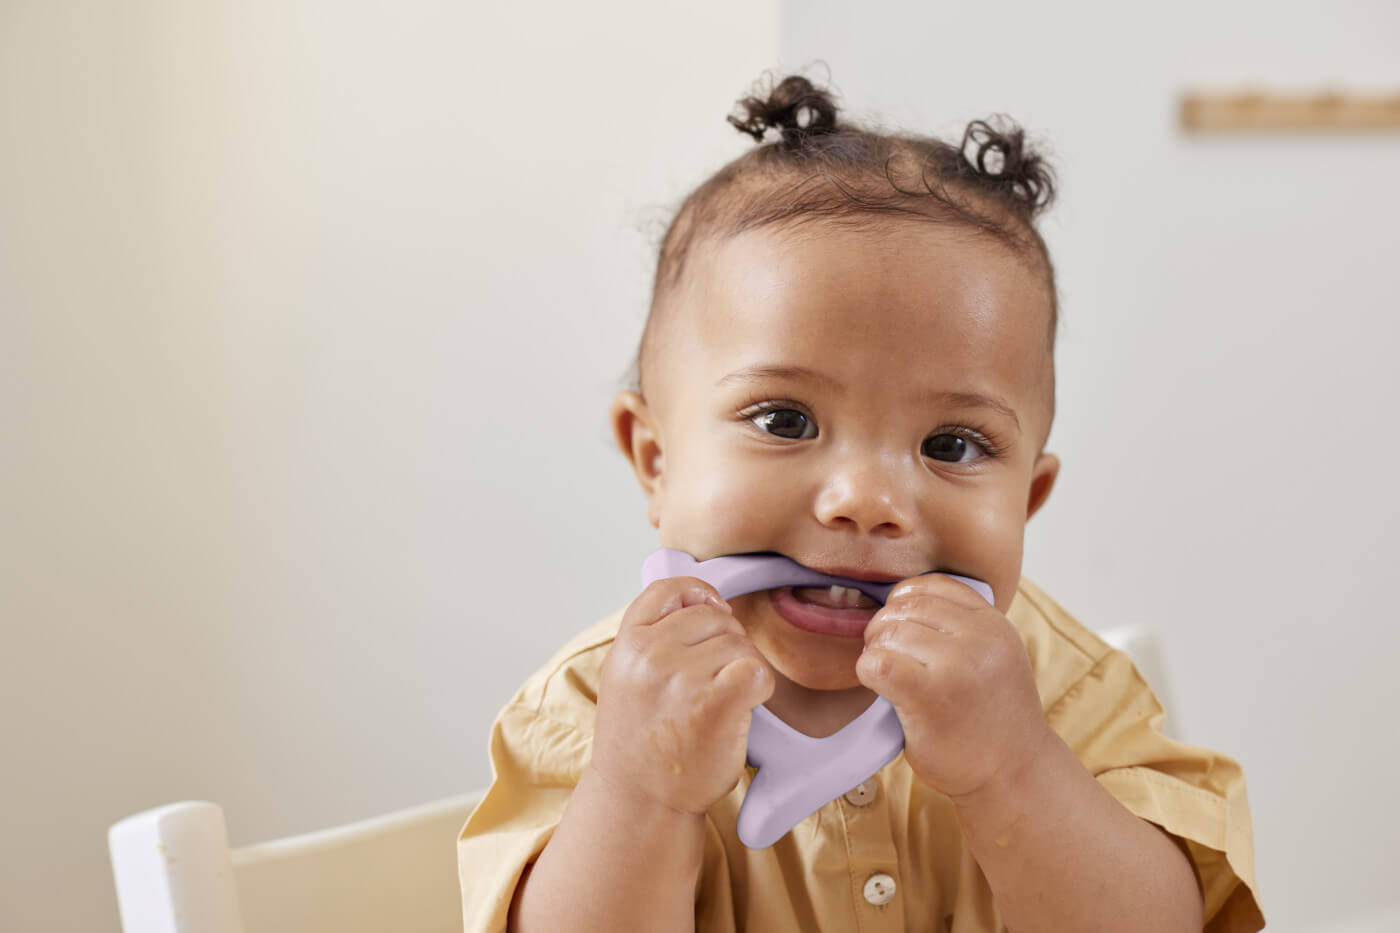 Why a silicone teether?